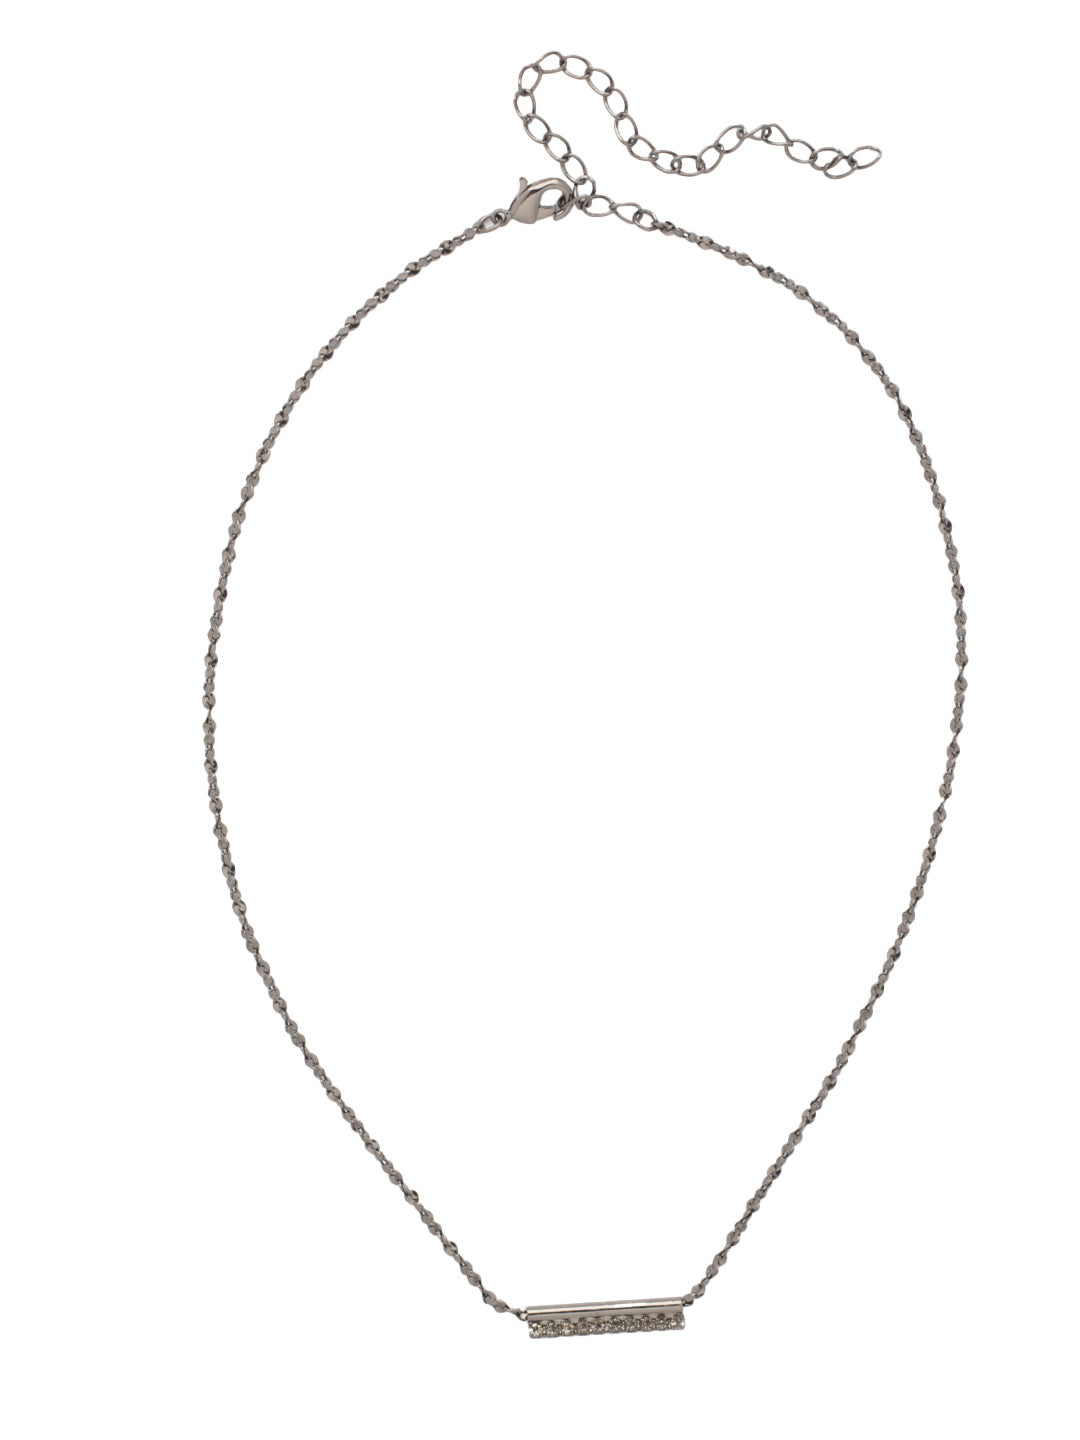 Rosamund Tennis Necklace - NFL7GMBD - <p>The Rosamund Tennis Necklace features a dainty crystal-embellished metal bar on an adjustable chain, secured with a lobster claw clasp. From Sorrelli's Black Diamond collection in our Gun Metal finish.</p>